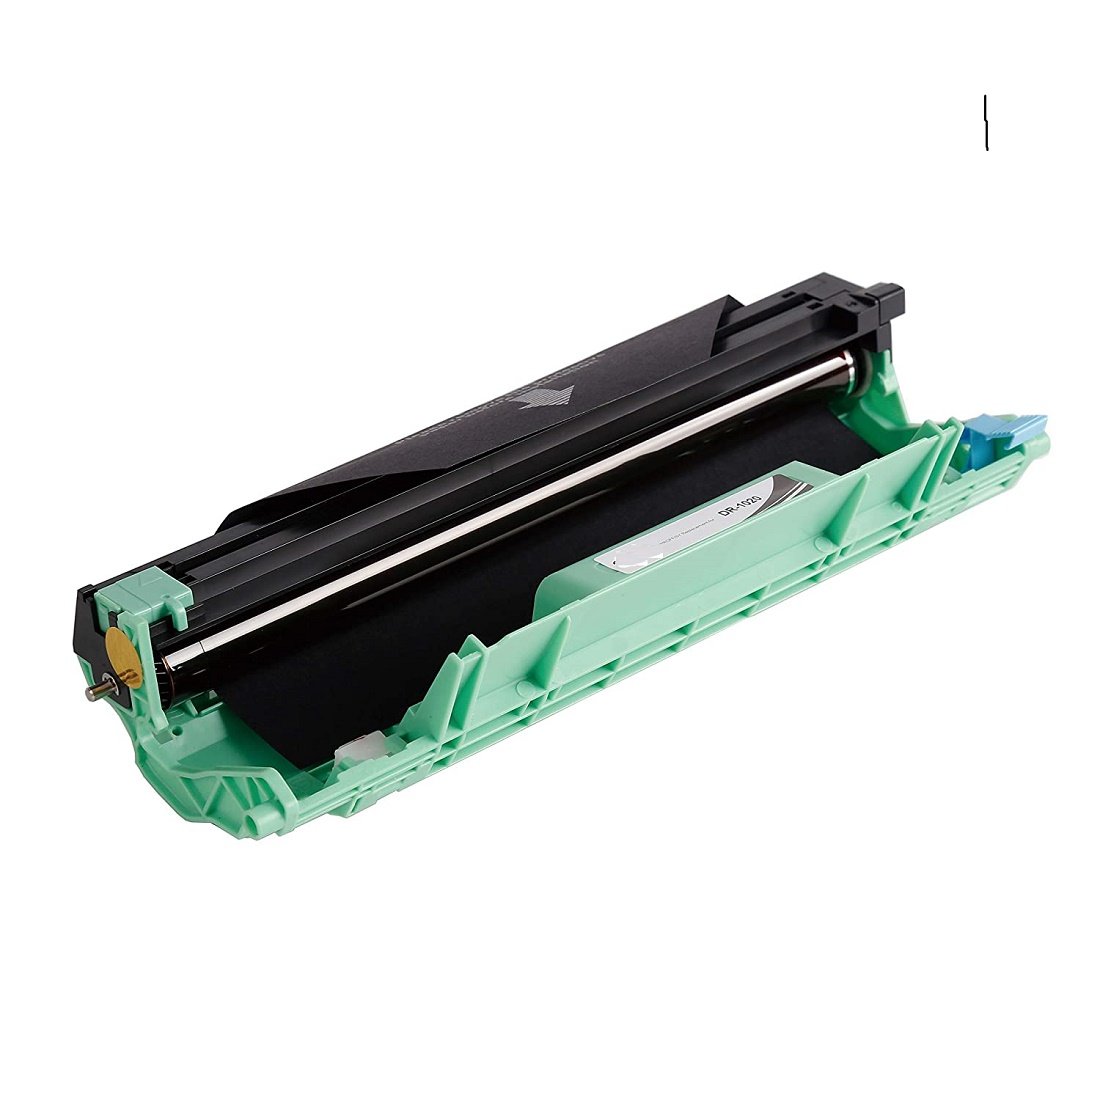 SuperInk Compatible Toner Cartridge Replacement for Brother TN1000 TN-1000  to use with HL-1110 HL-1110R HL-1111 HL-1112 MFC-1810 MFC-1815R MFC-1910W